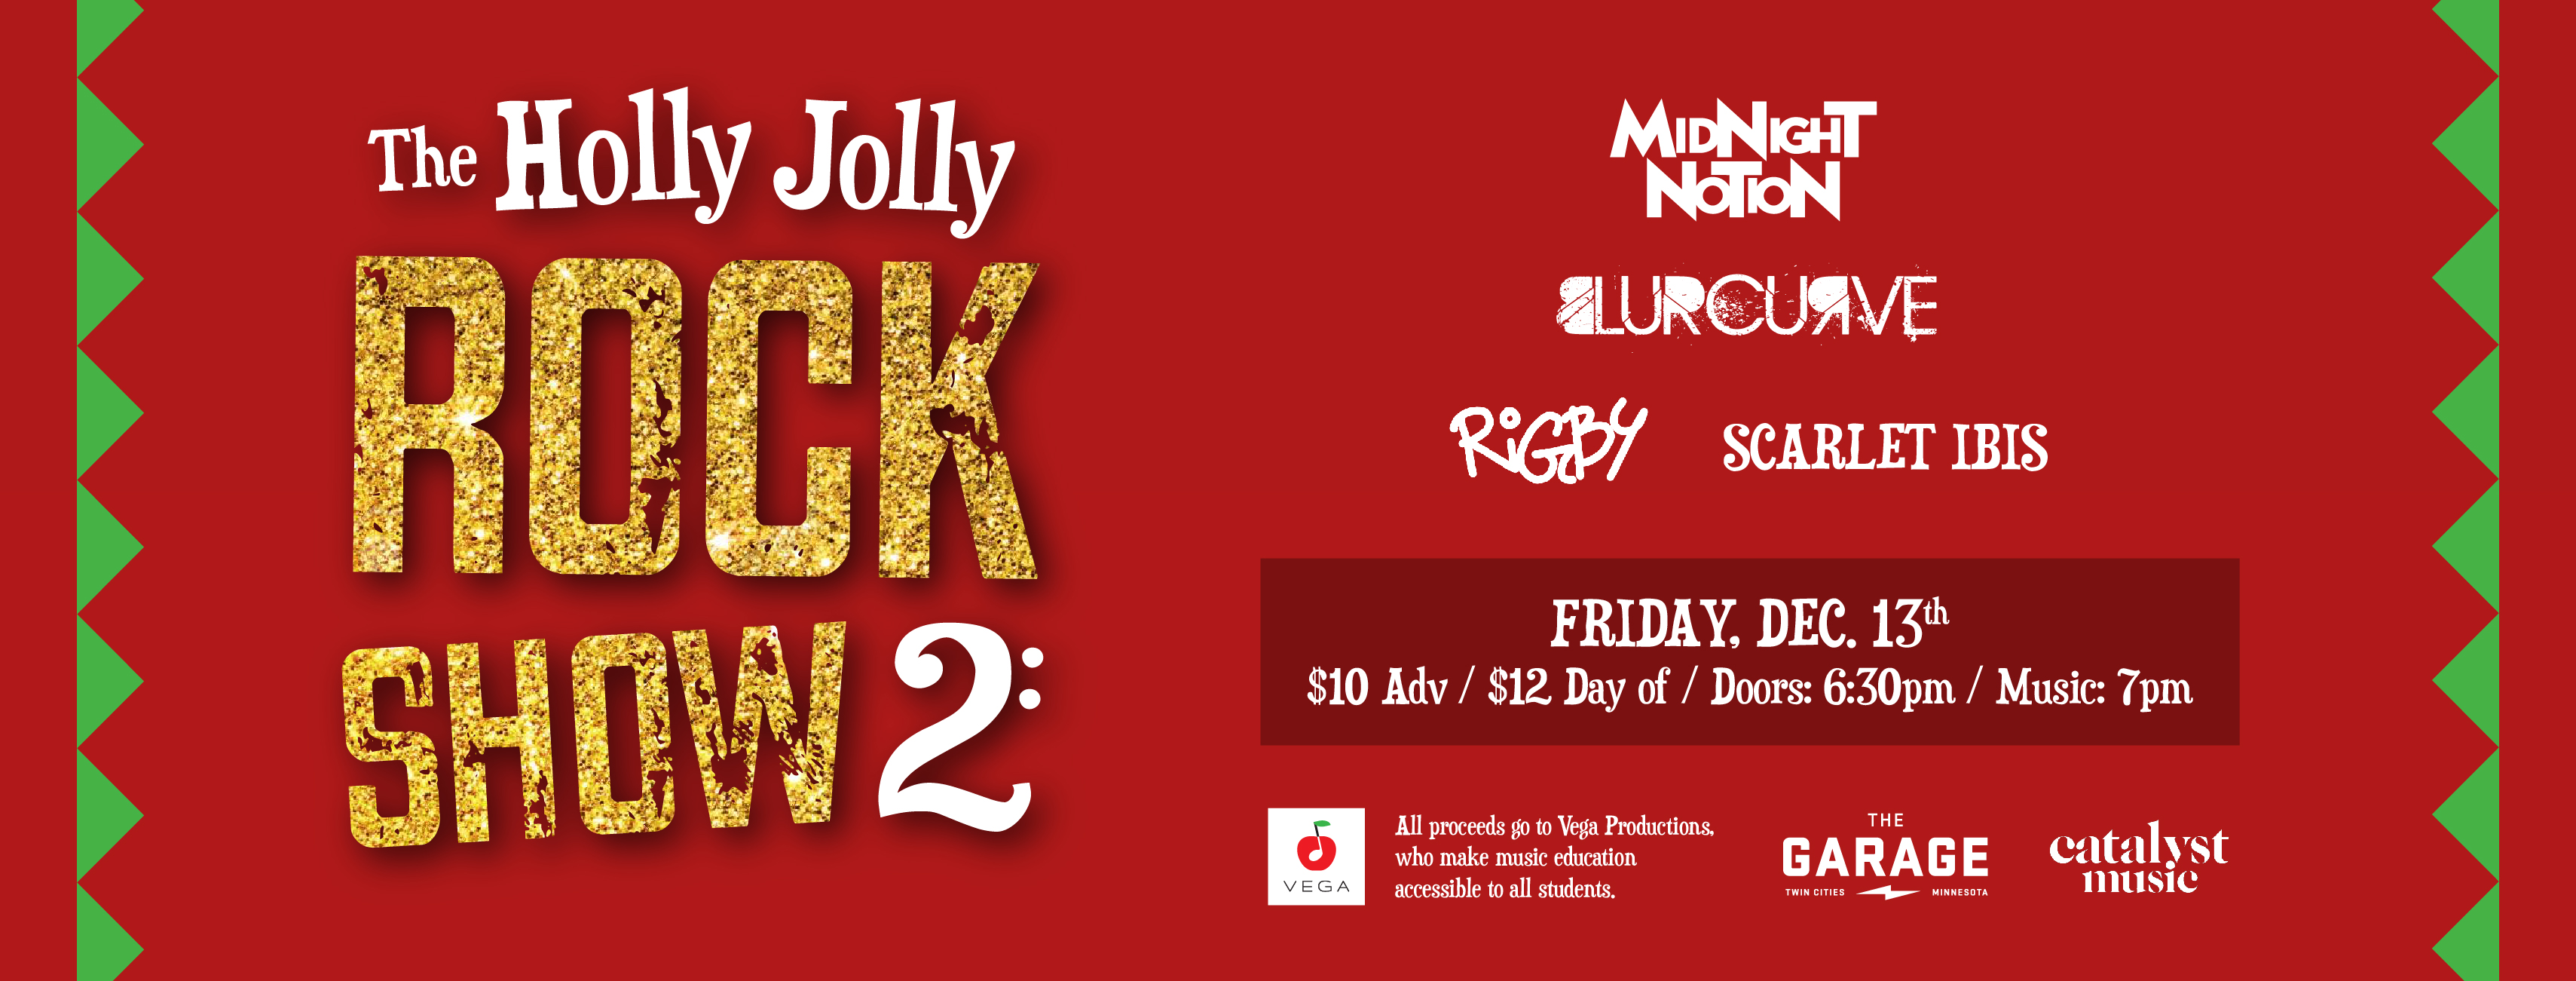 A poster for The Holly Jolly Rock Show 2. It's mostly white text on a red background, but "Rock Show" is glowing gold glittery text. The "2" looks like a bass clef.